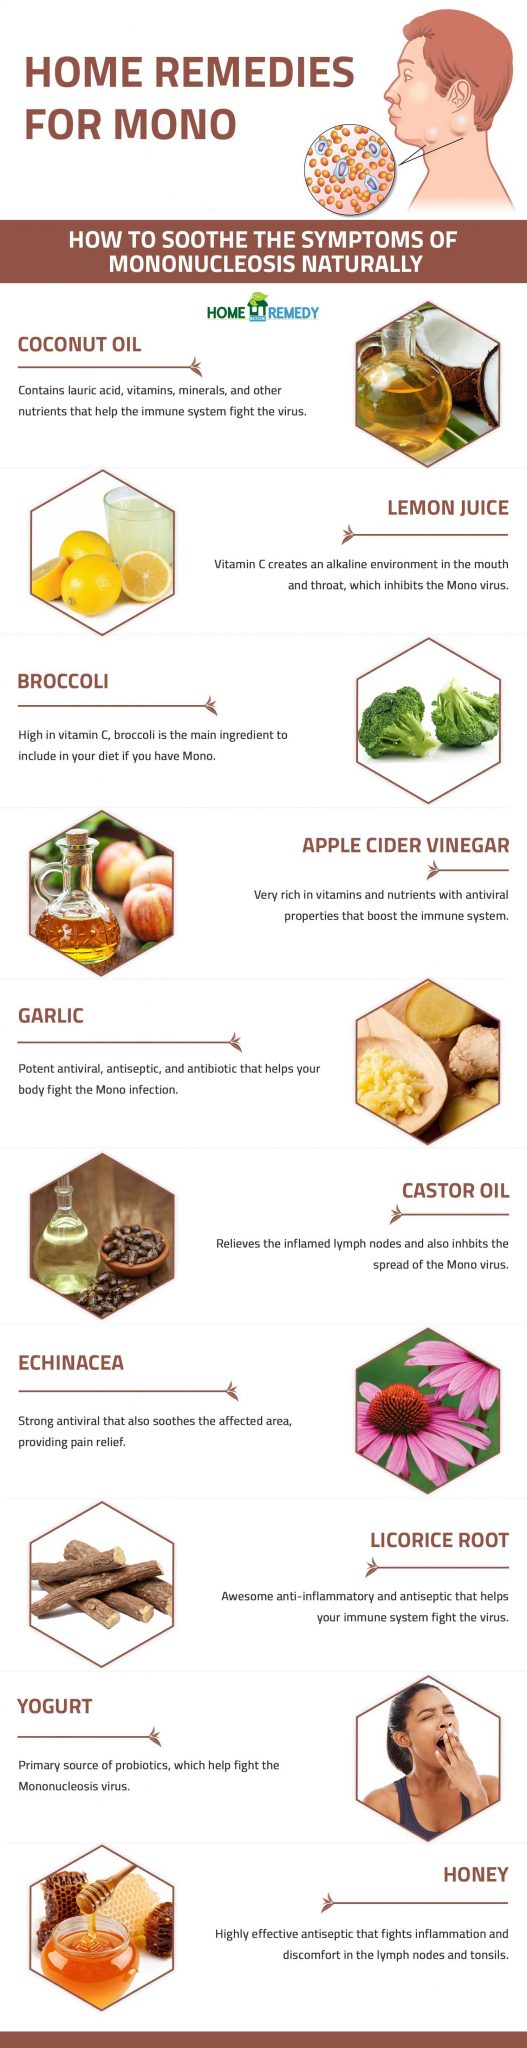 home remedies for mono infographic